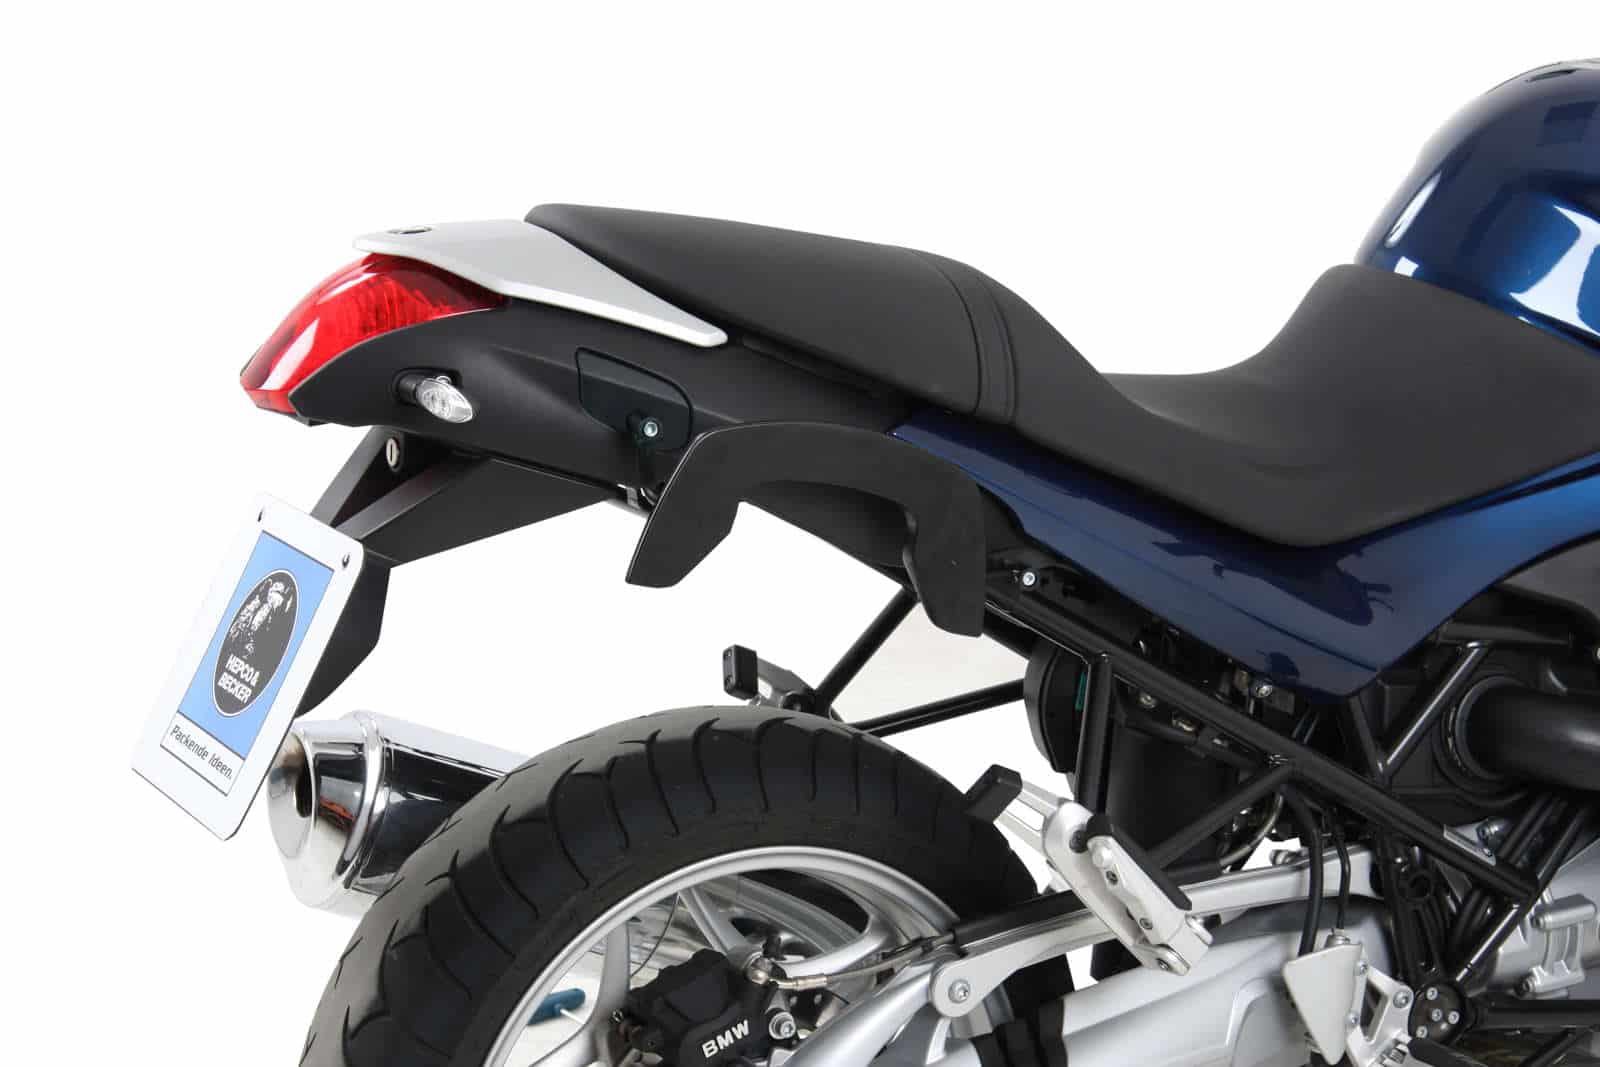 C-Bow sidecarrier for BMW R 1200 R (2006-2014)